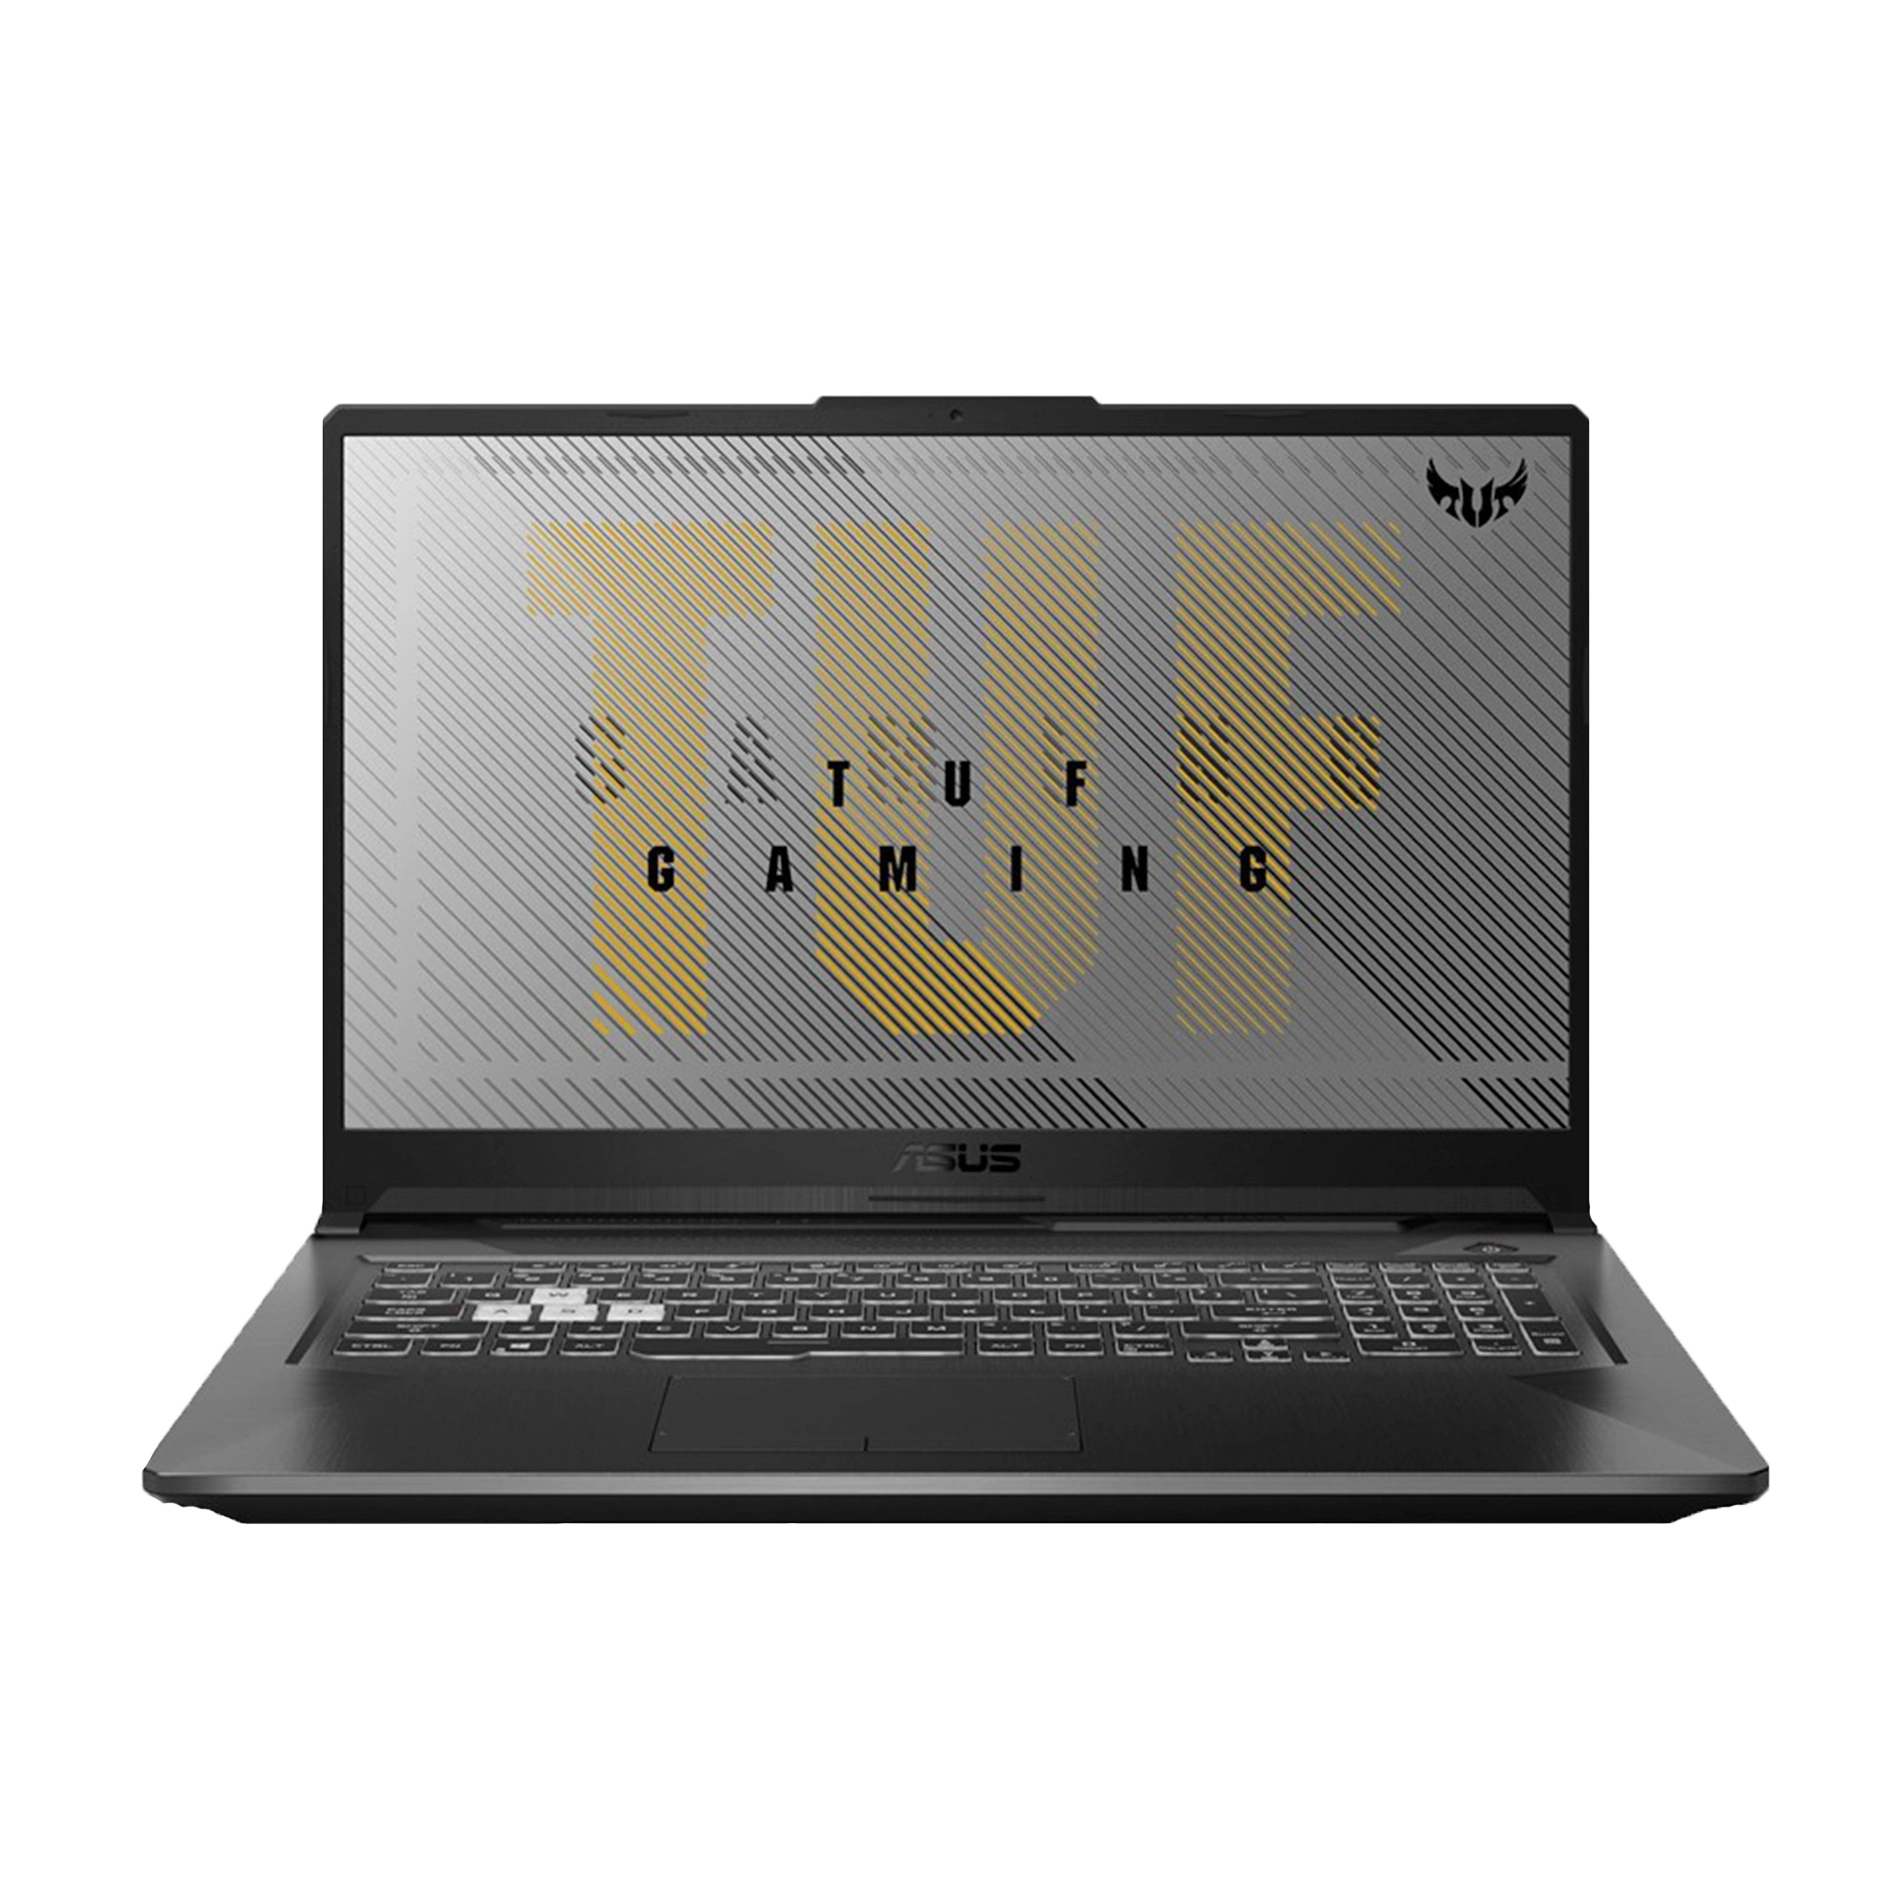 ASUS TUF A17 VR Ready Laptop with TUF logo on the screen